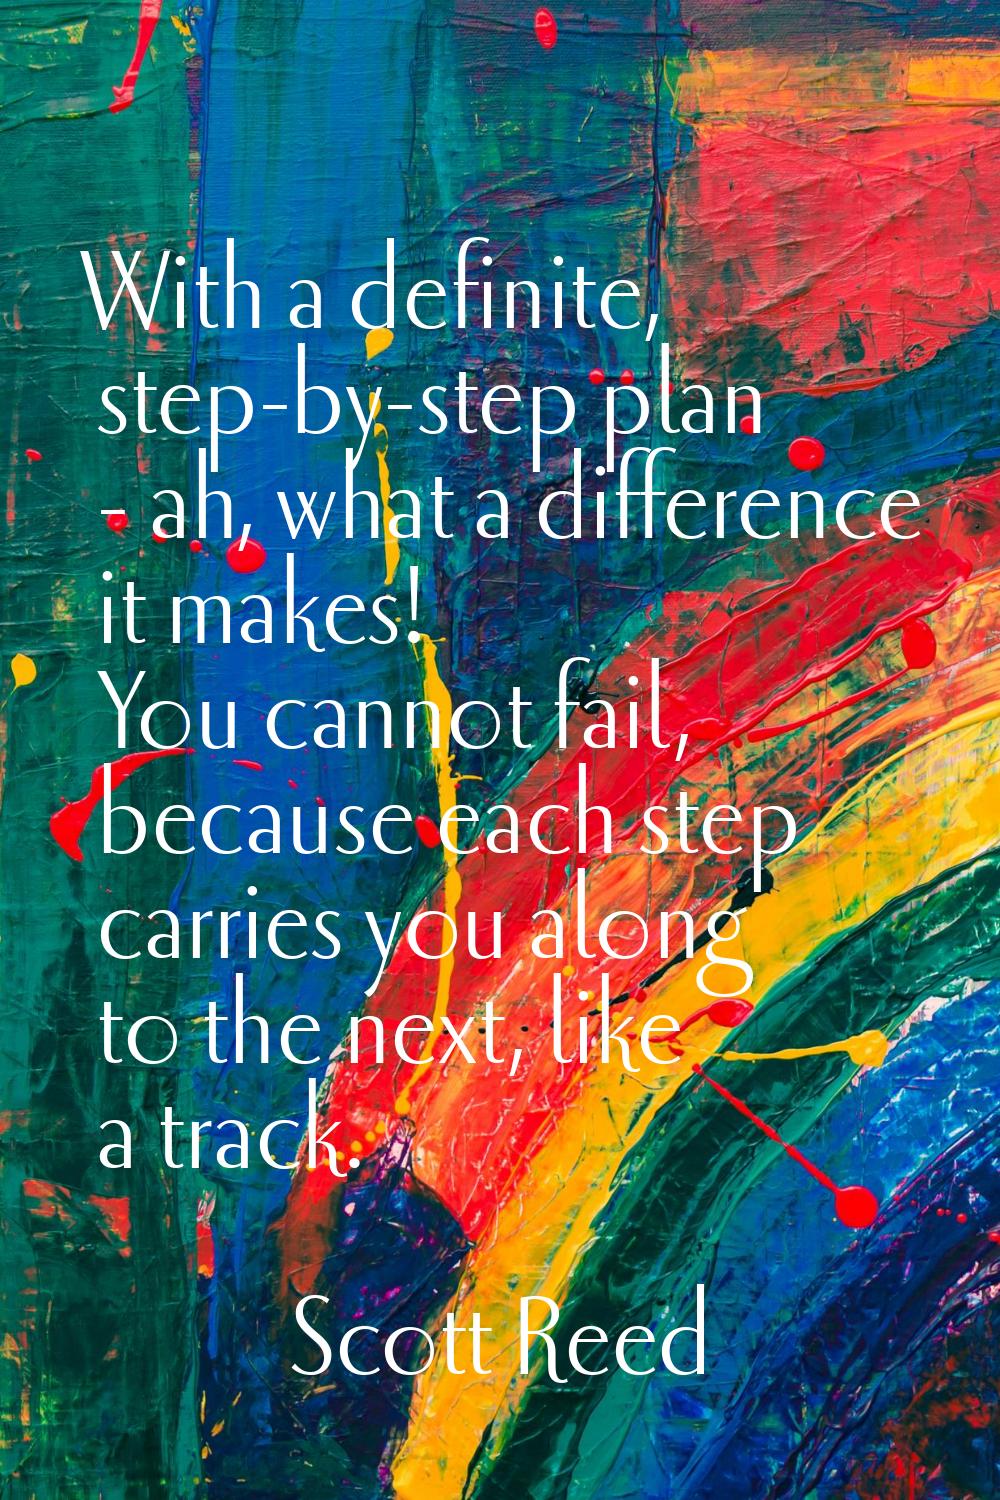 With a definite, step-by-step plan - ah, what a difference it makes! You cannot fail, because each 